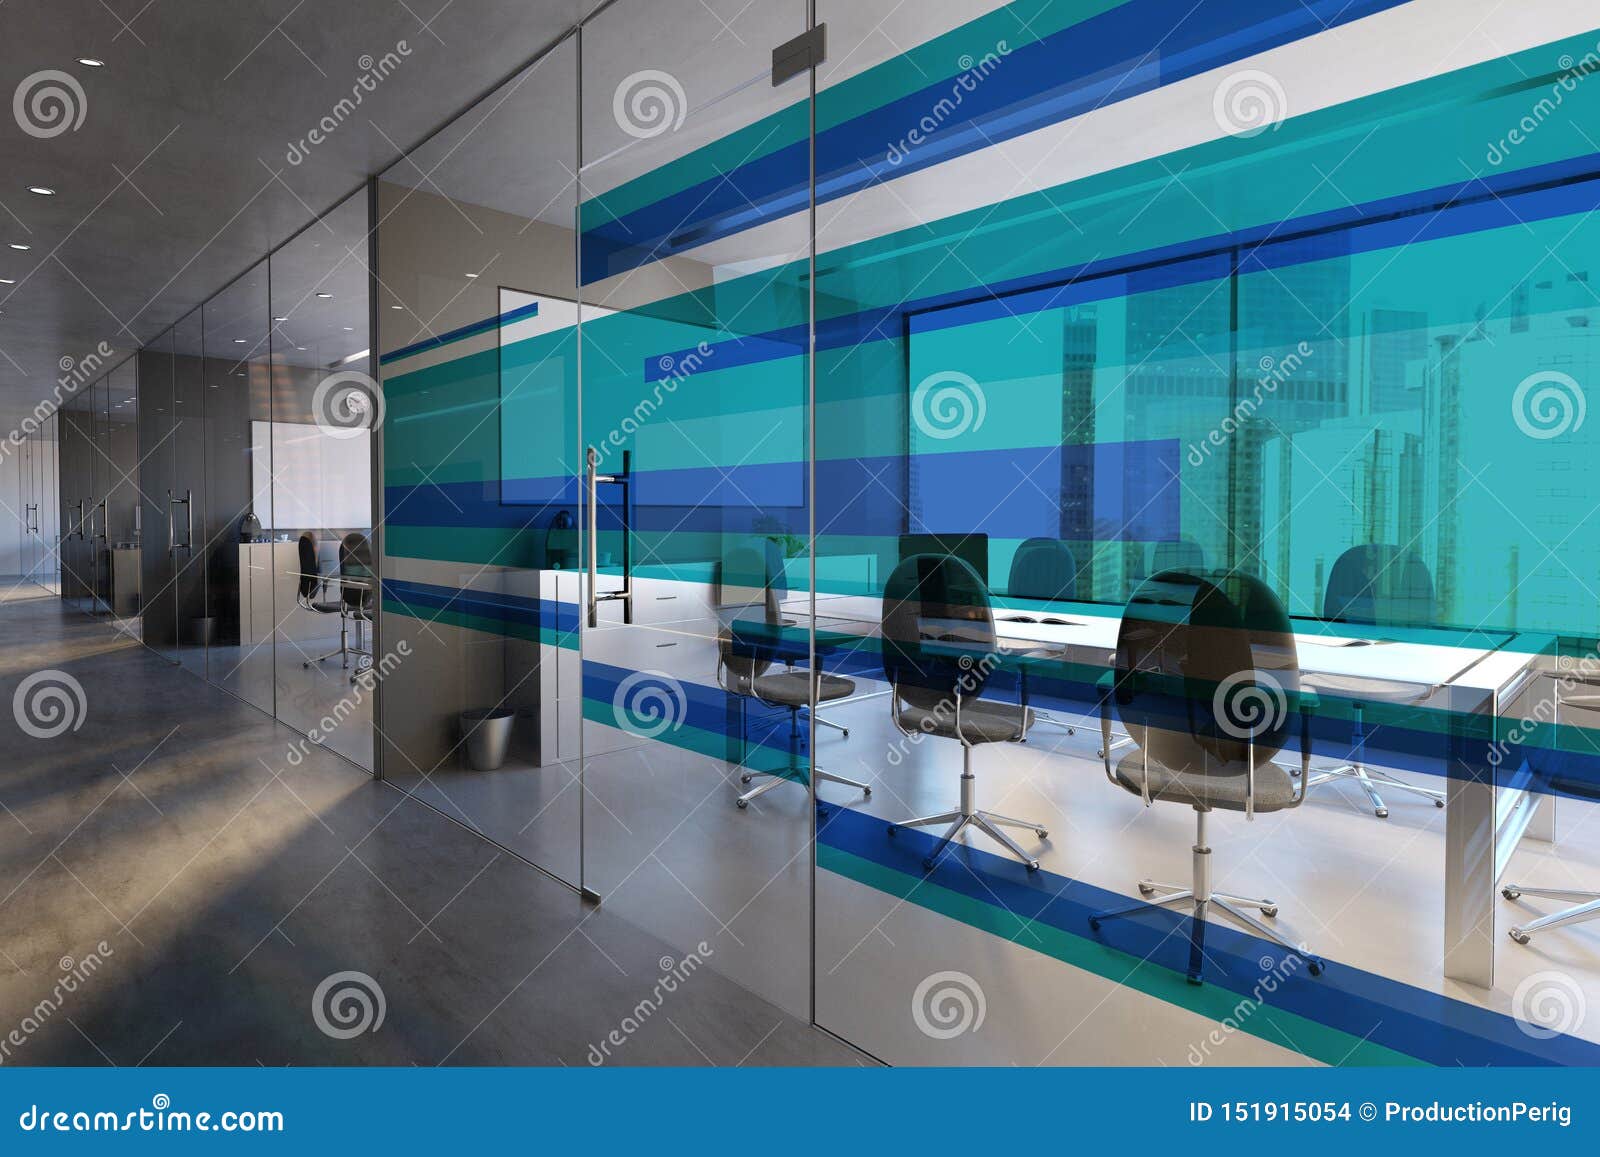 Download Glass Office Room Wall Mockup - 3d Rendering Stock ...